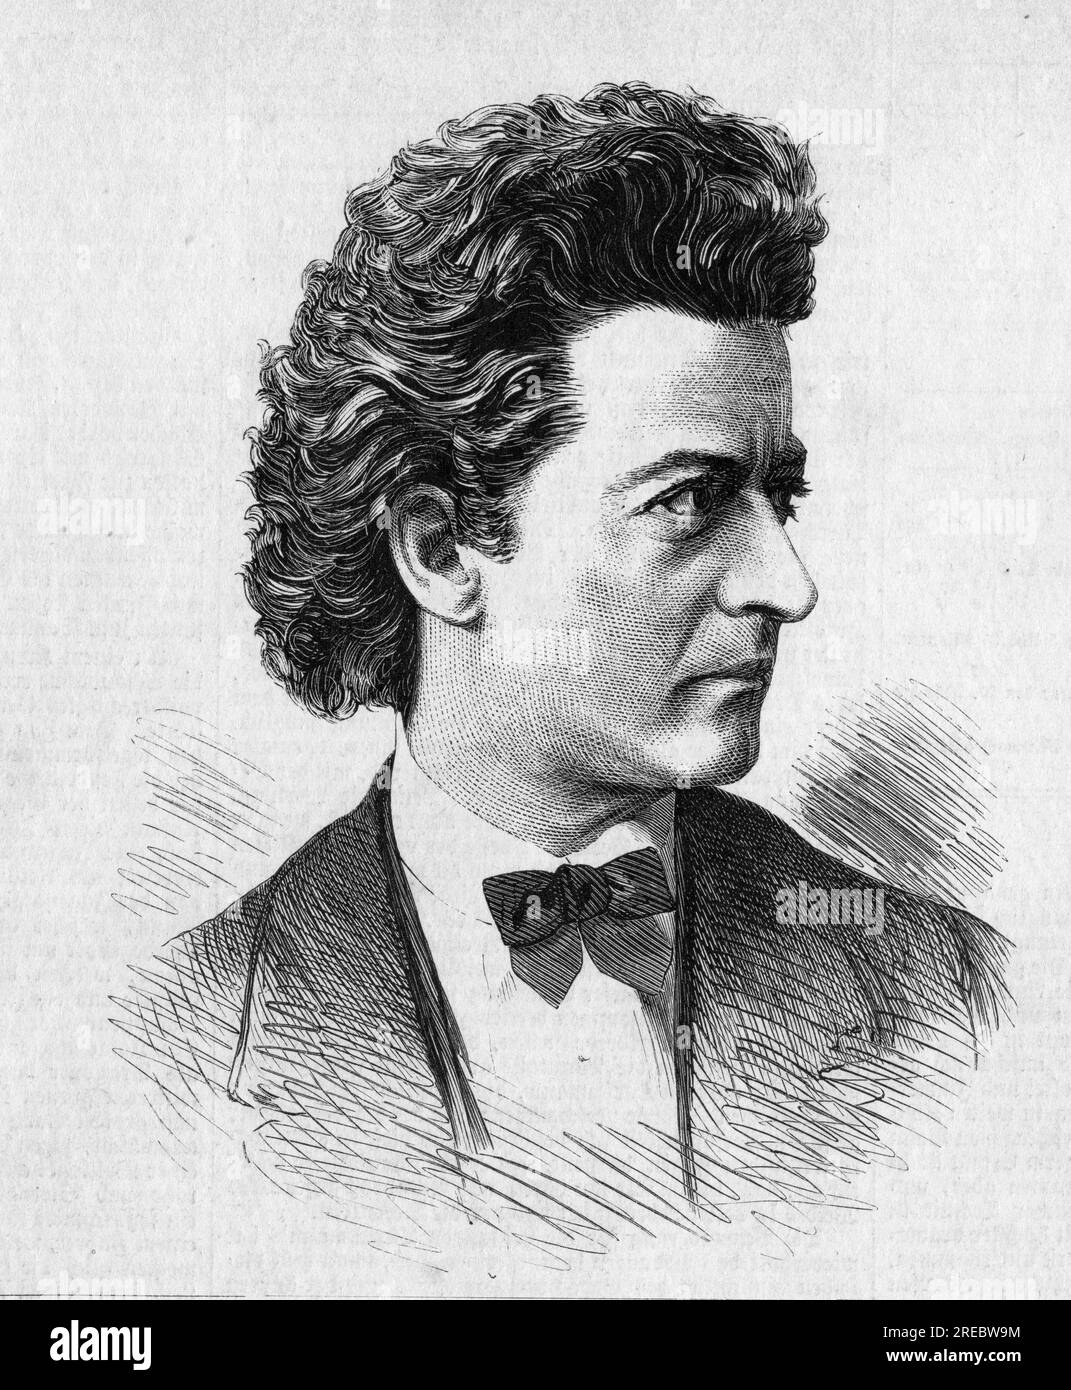 Tuerschmann, Richard, 1834 - 1899, German actor, wood engraving, later 19th century, ARTIST'S COPYRIGHT HAS NOT TO BE CLEARED Stock Photo